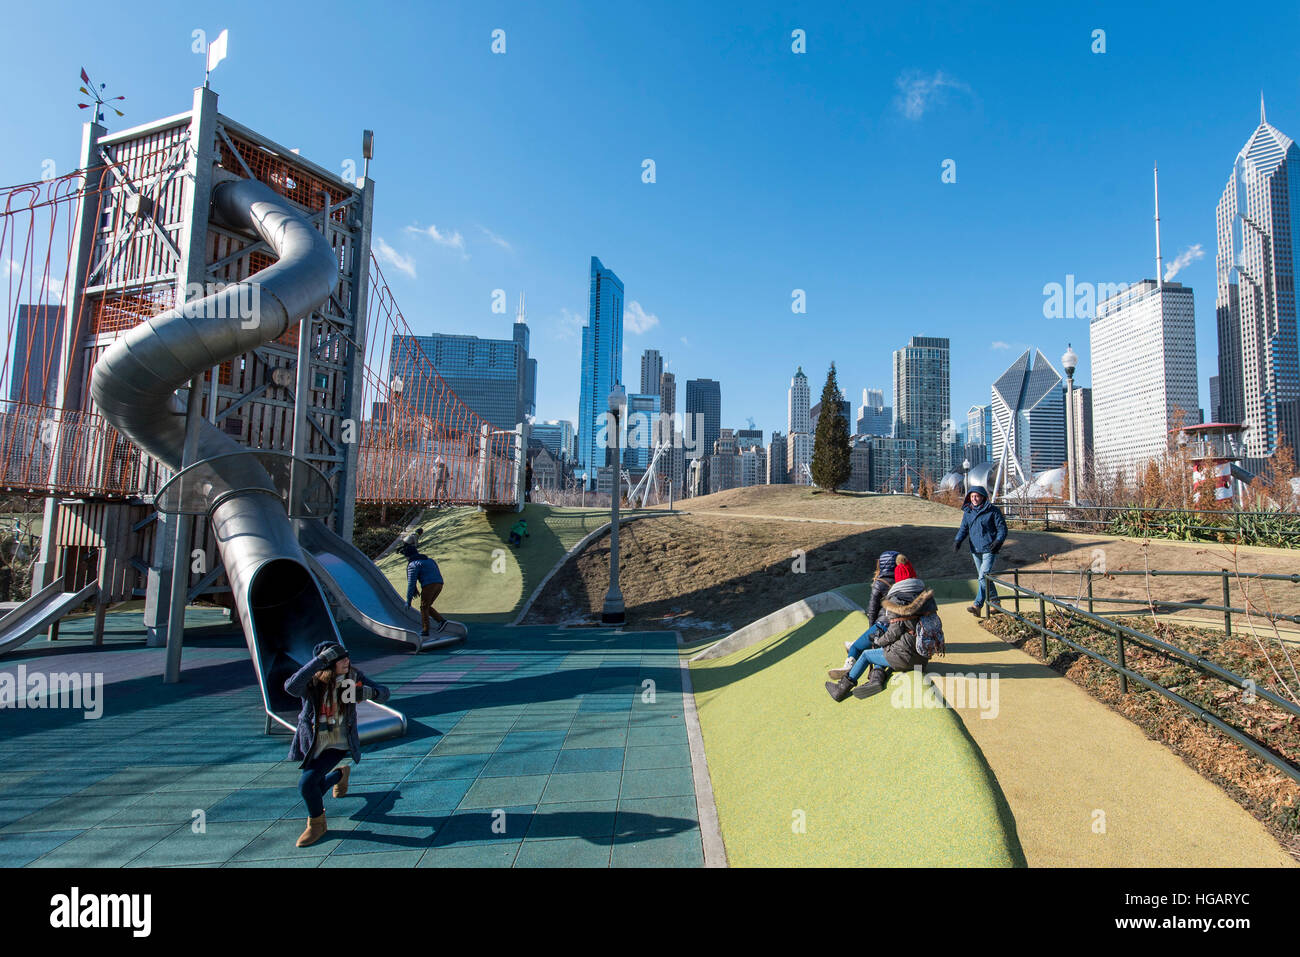 Chicago, USA. The Play Garden in Maggie Daley Park, the first of its kind in Chicago, helped draw a record 54.1 million people who visited Chicago in 2016, Mayor Rahm Emanuel has reported, an increase of 2.9 percent compared to 2015.  In addition, Chicago's tourism industry supported more than 145,000 jobs and $15 billion in direct tourism spending in 2016.   © Stephen Chung / Alamy Live News Stock Photo